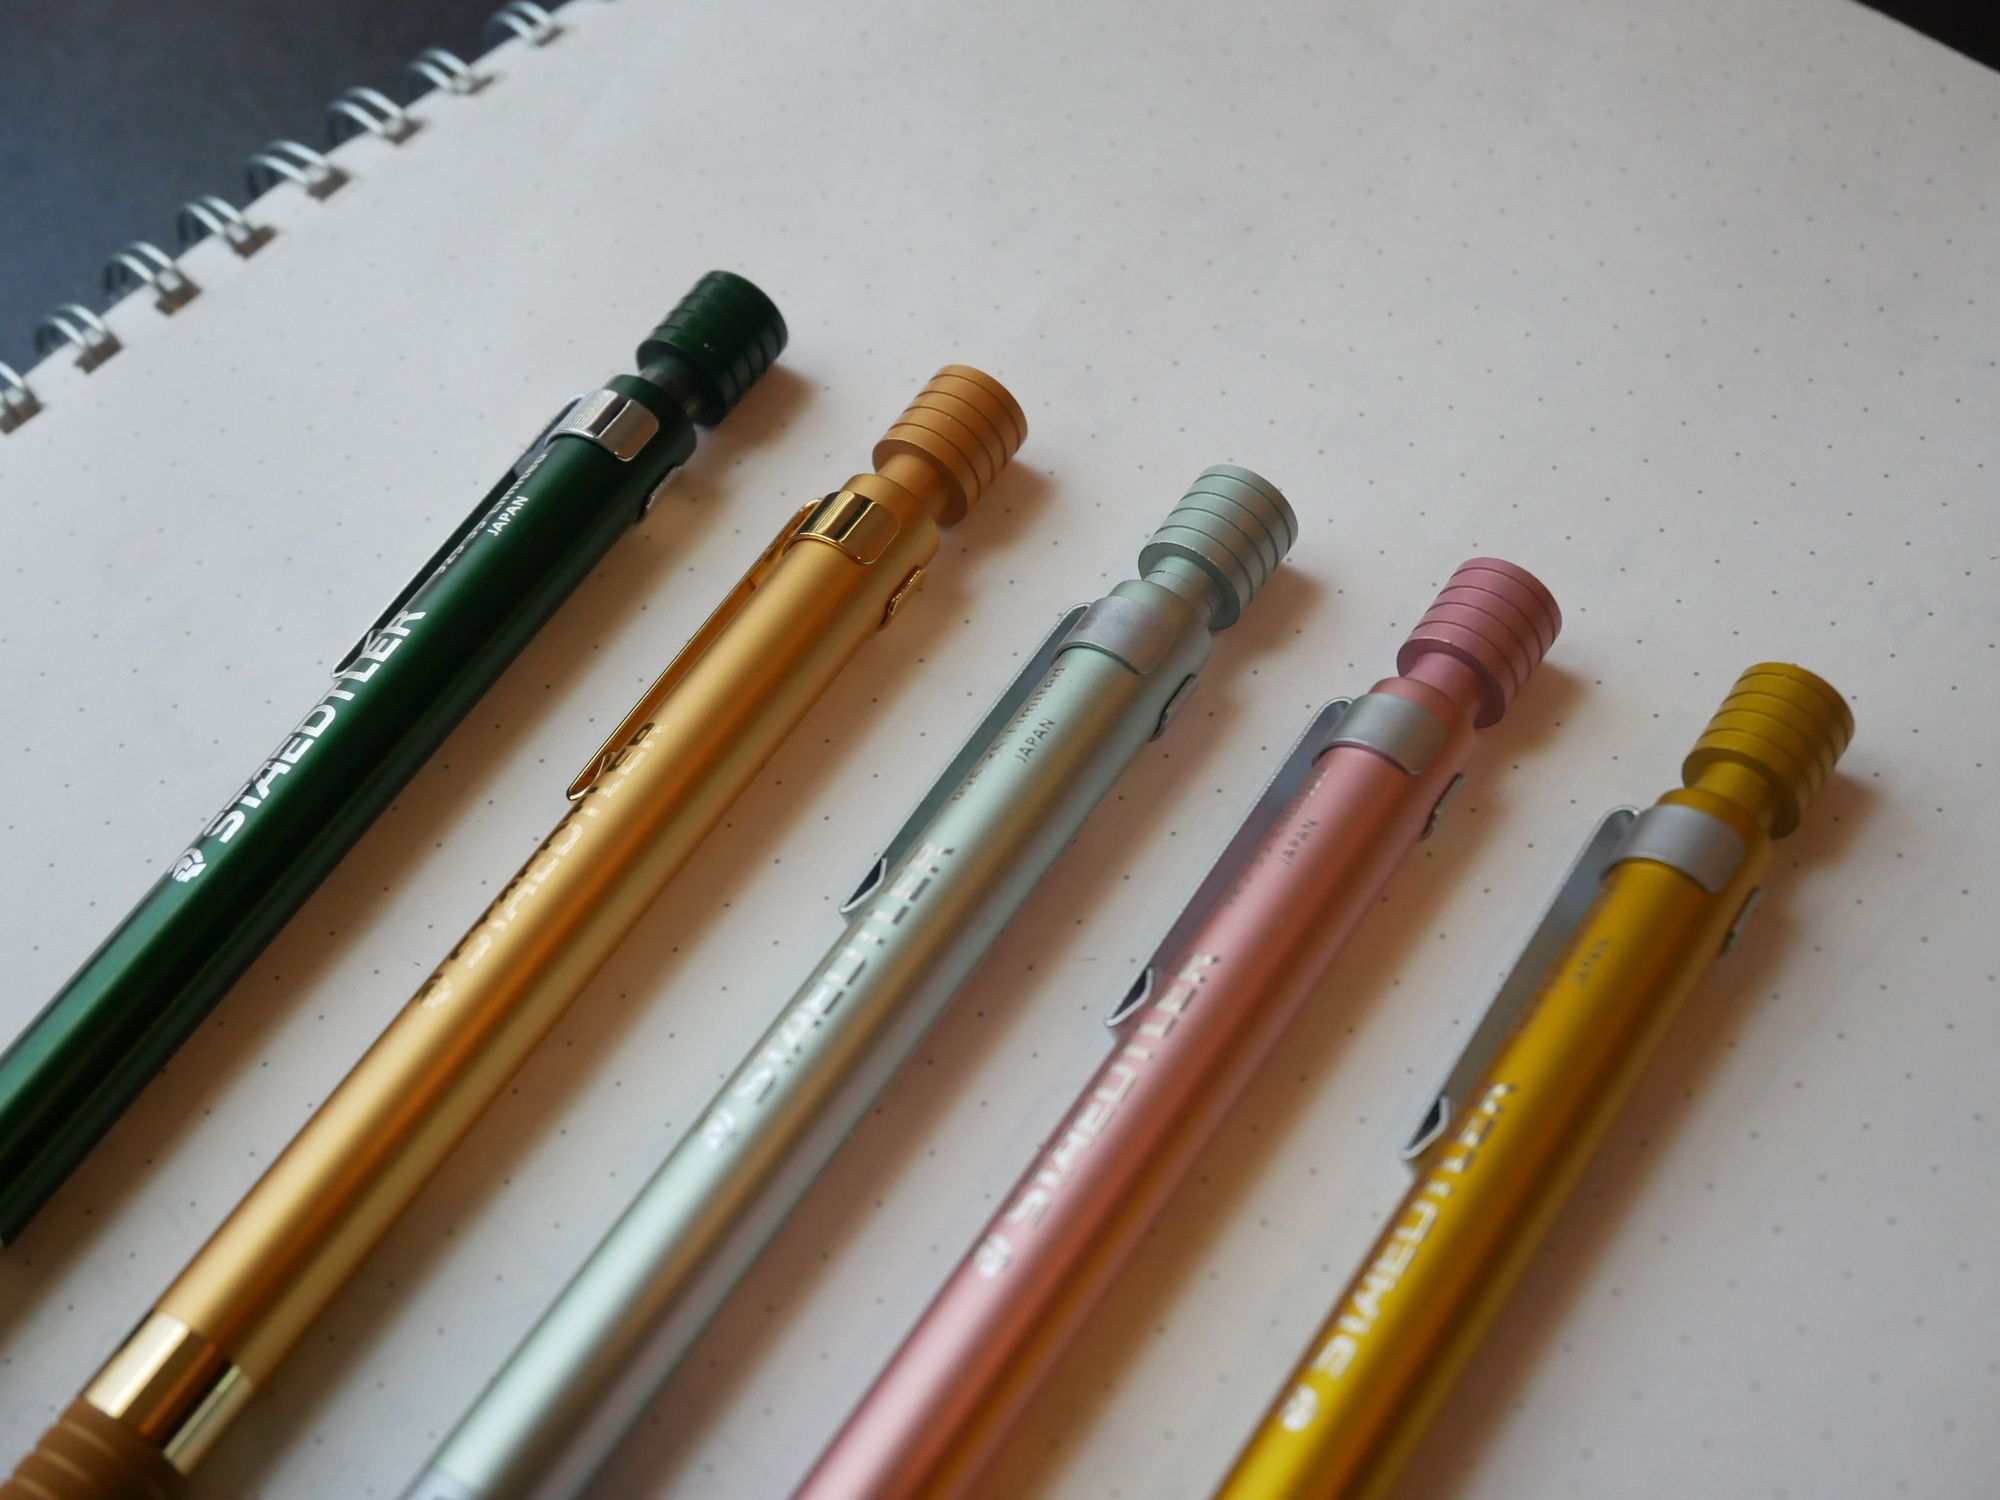 Ultimate Review: Staedtler 925-35 Limited Edition Mechanical Pencils